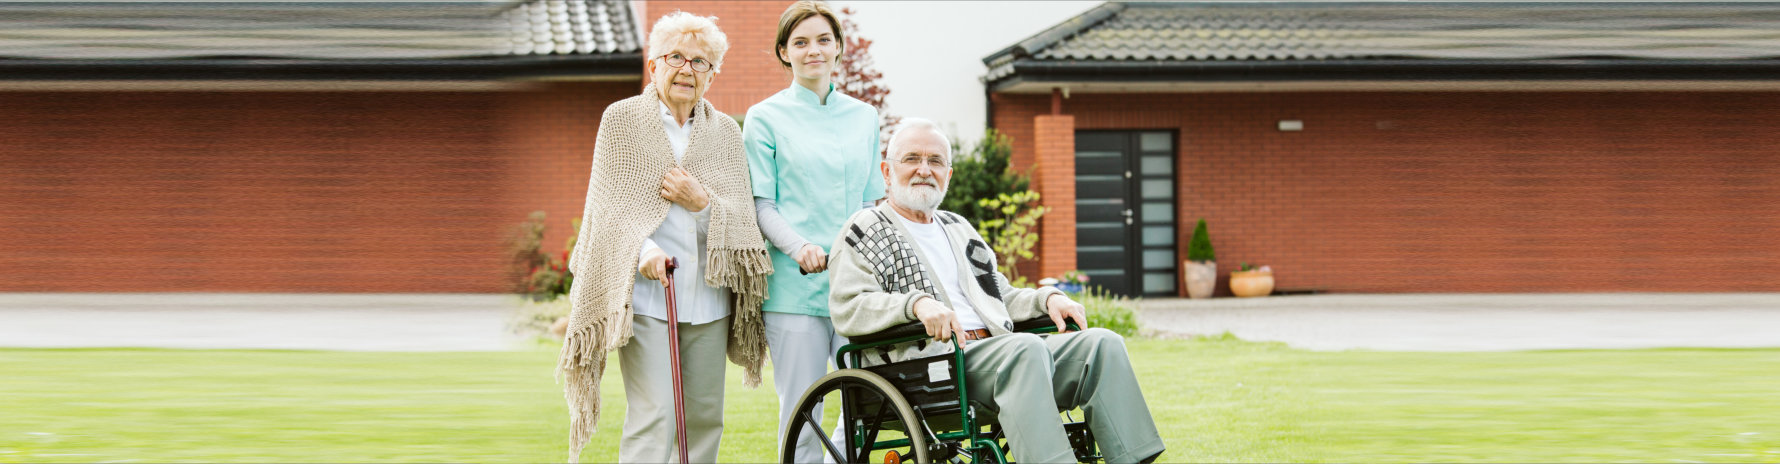 caregiver with two elderly people